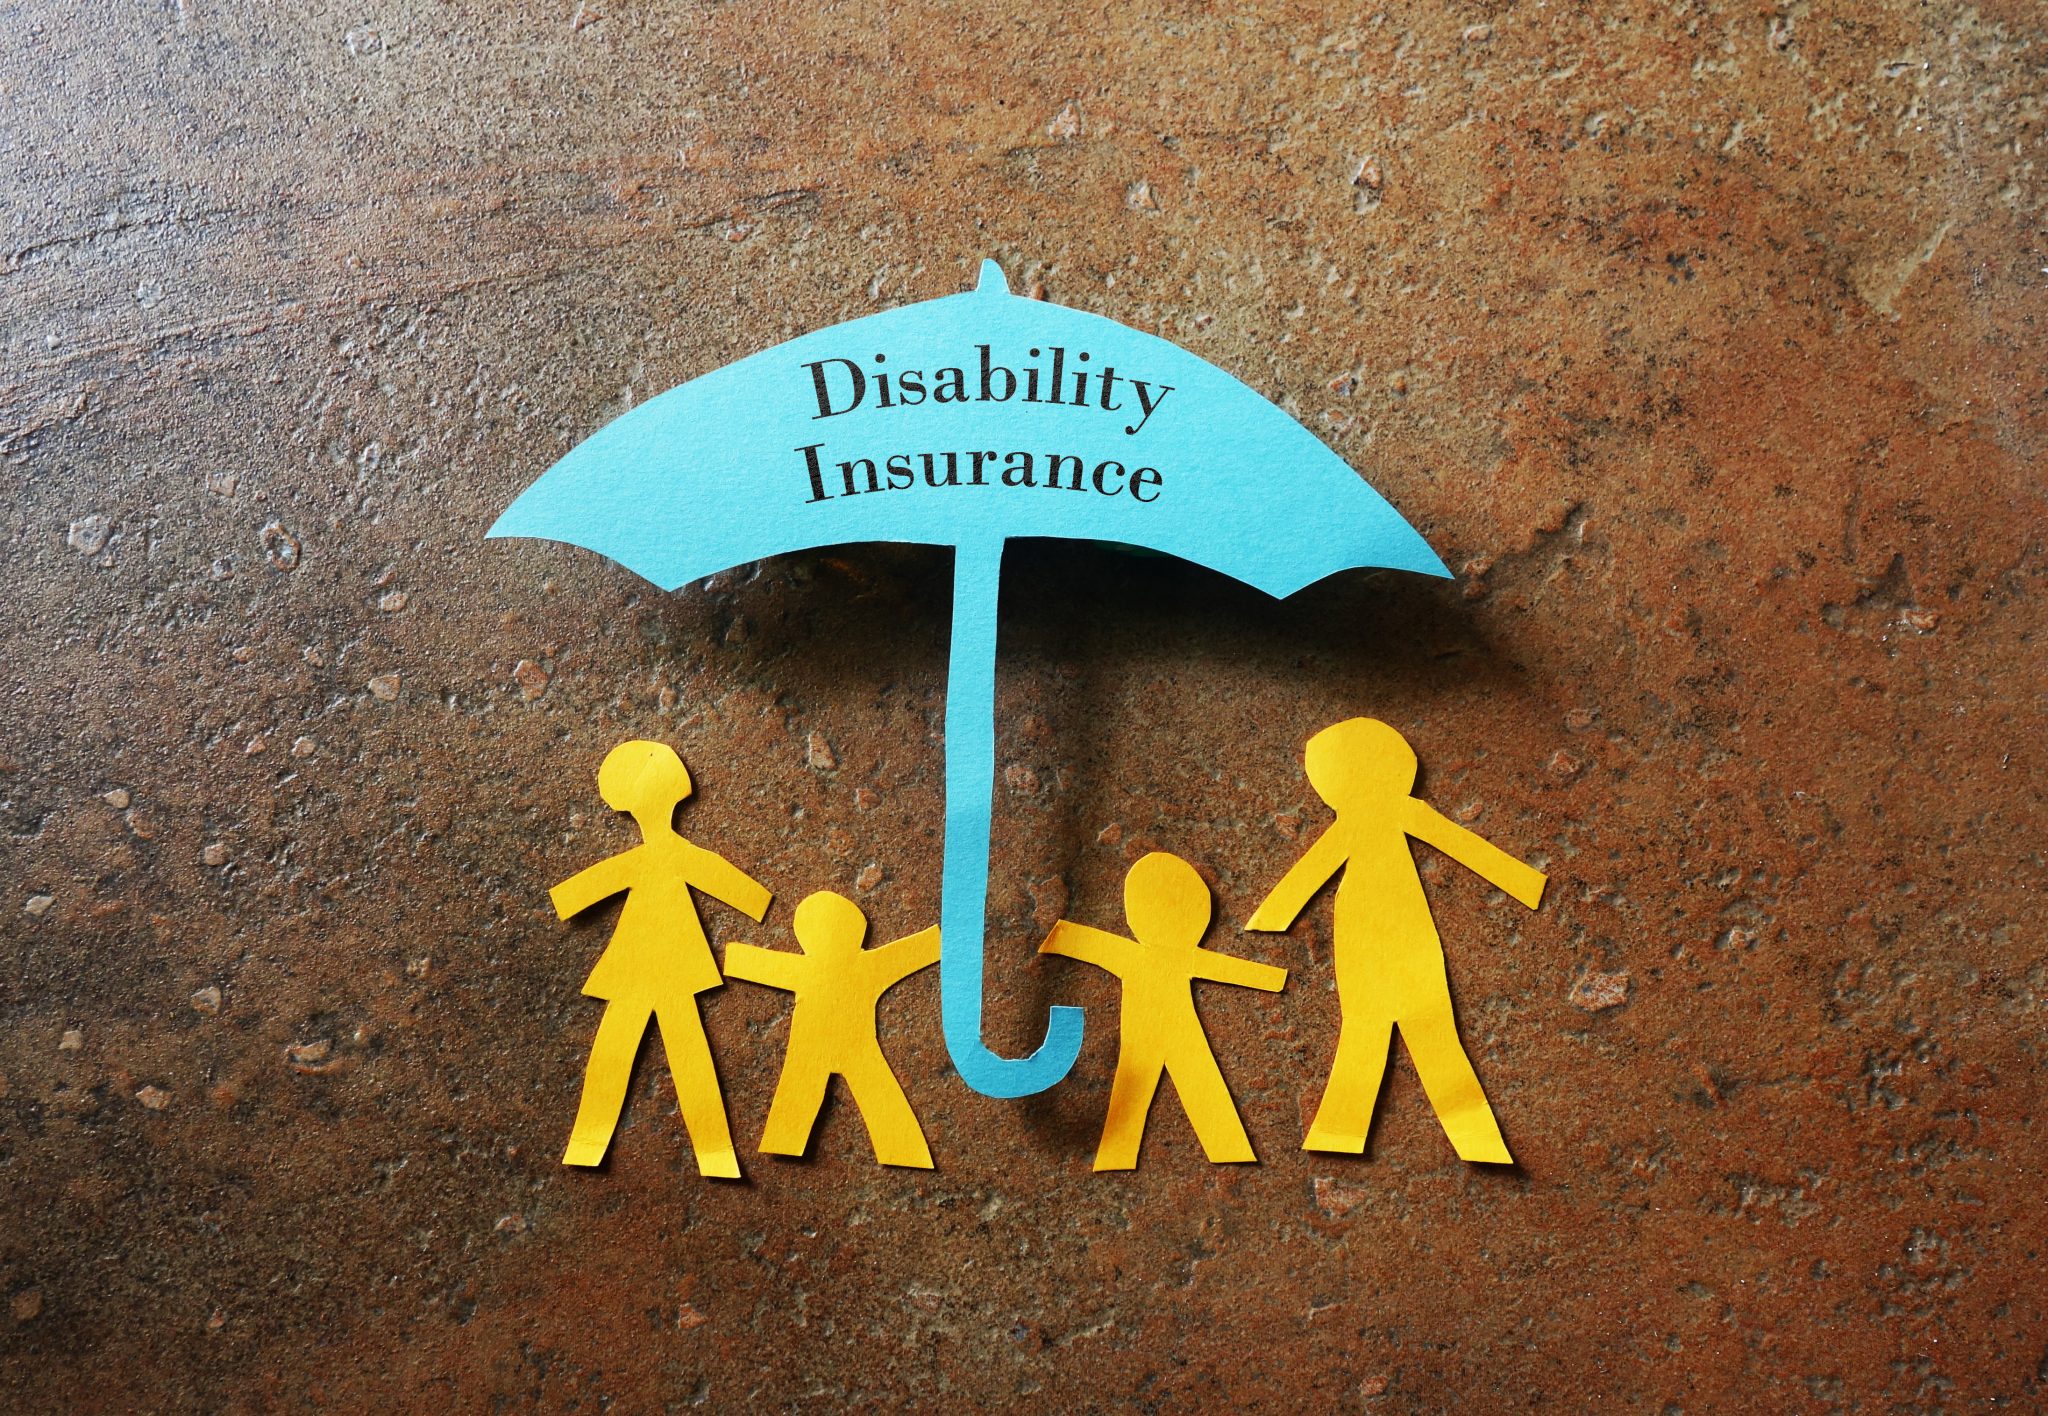 The Long-Term Disability Insurance: Here is What You Should Know